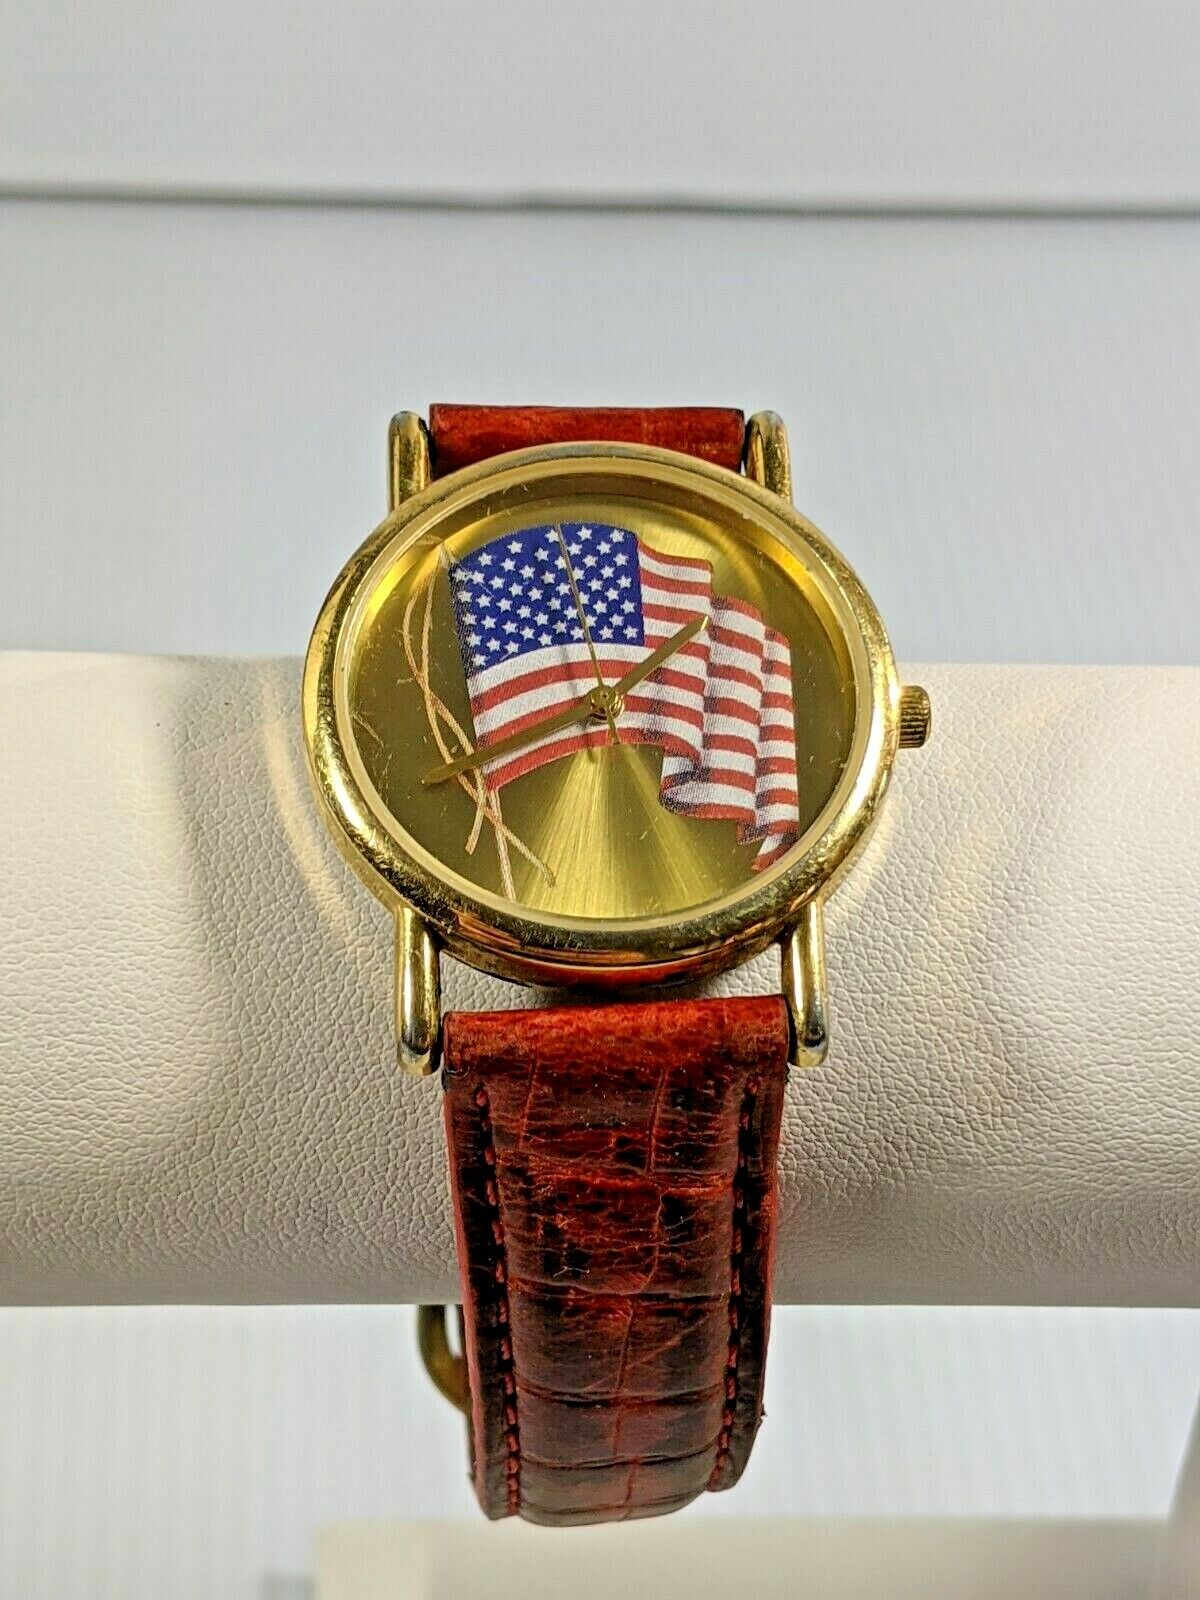 Valdawn Gold Tone American Flag Red Distressed Leather Band Watch 9 Inch 